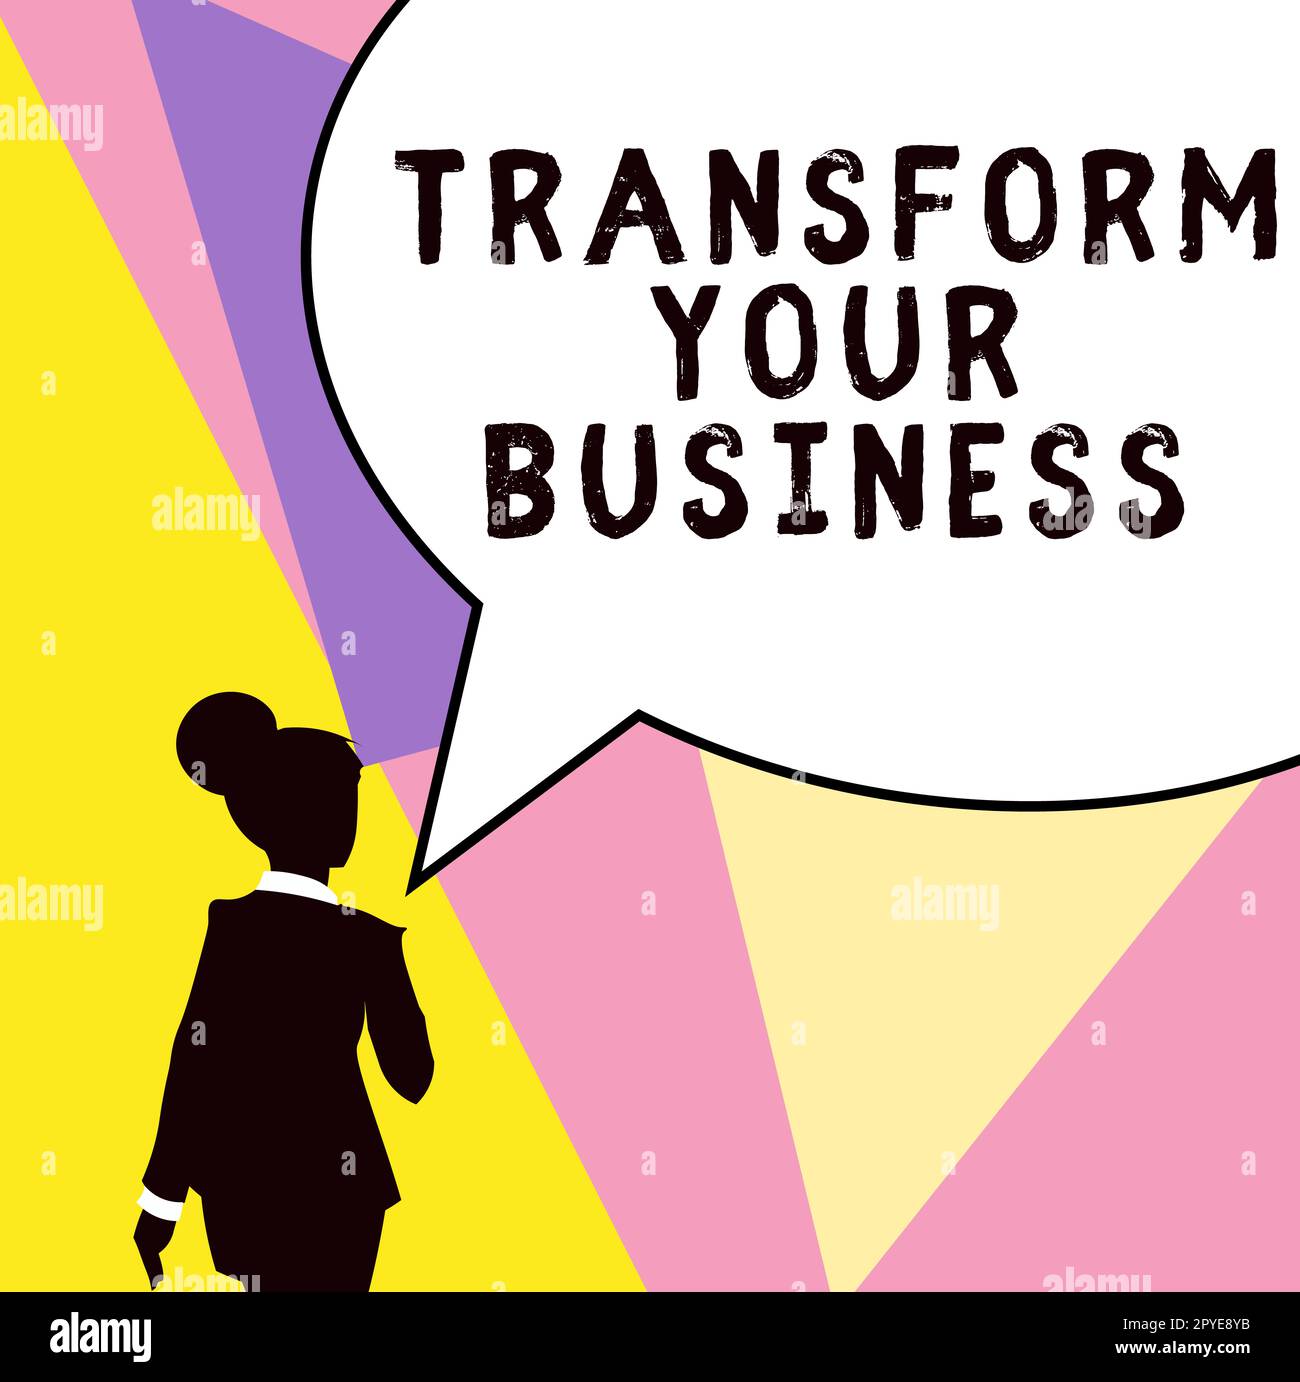 Inspiration showing sign Transform Your Business. Business concept Modify energy on innovation and sustainable growth Stock Photo